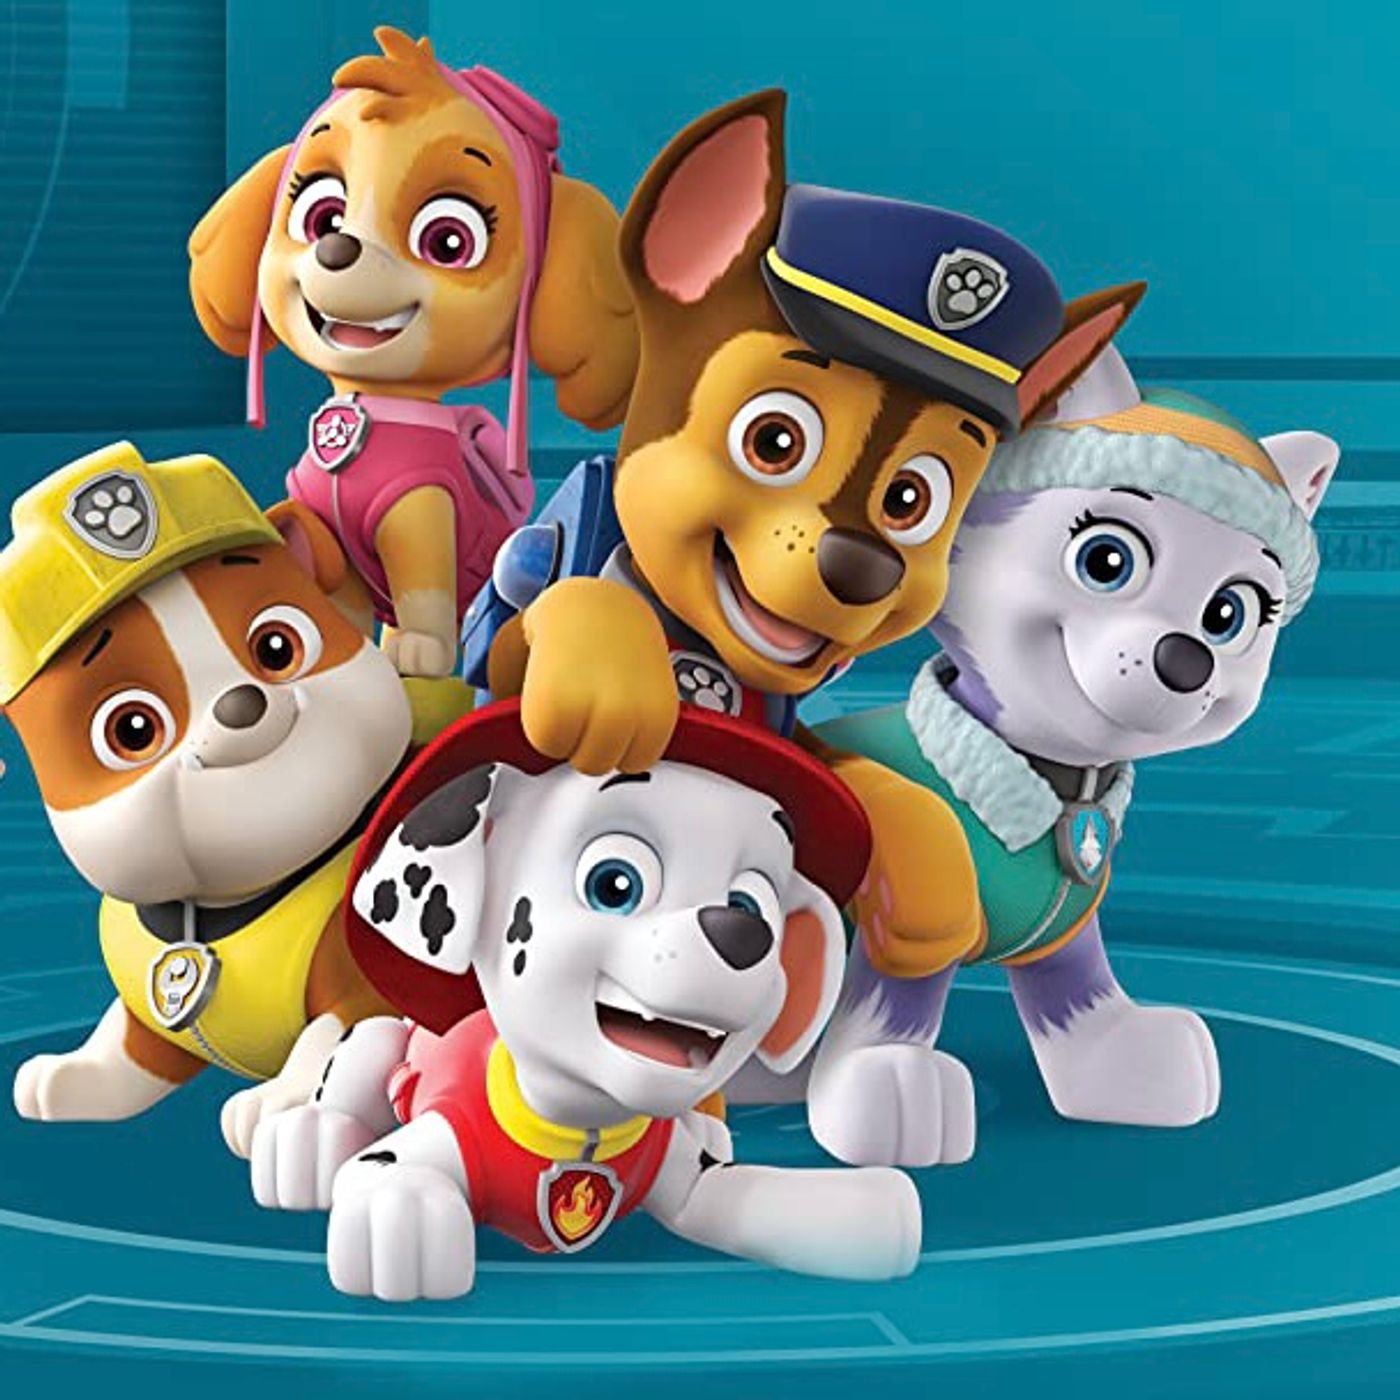 Labor Day with Paw Patrol & Capes Image